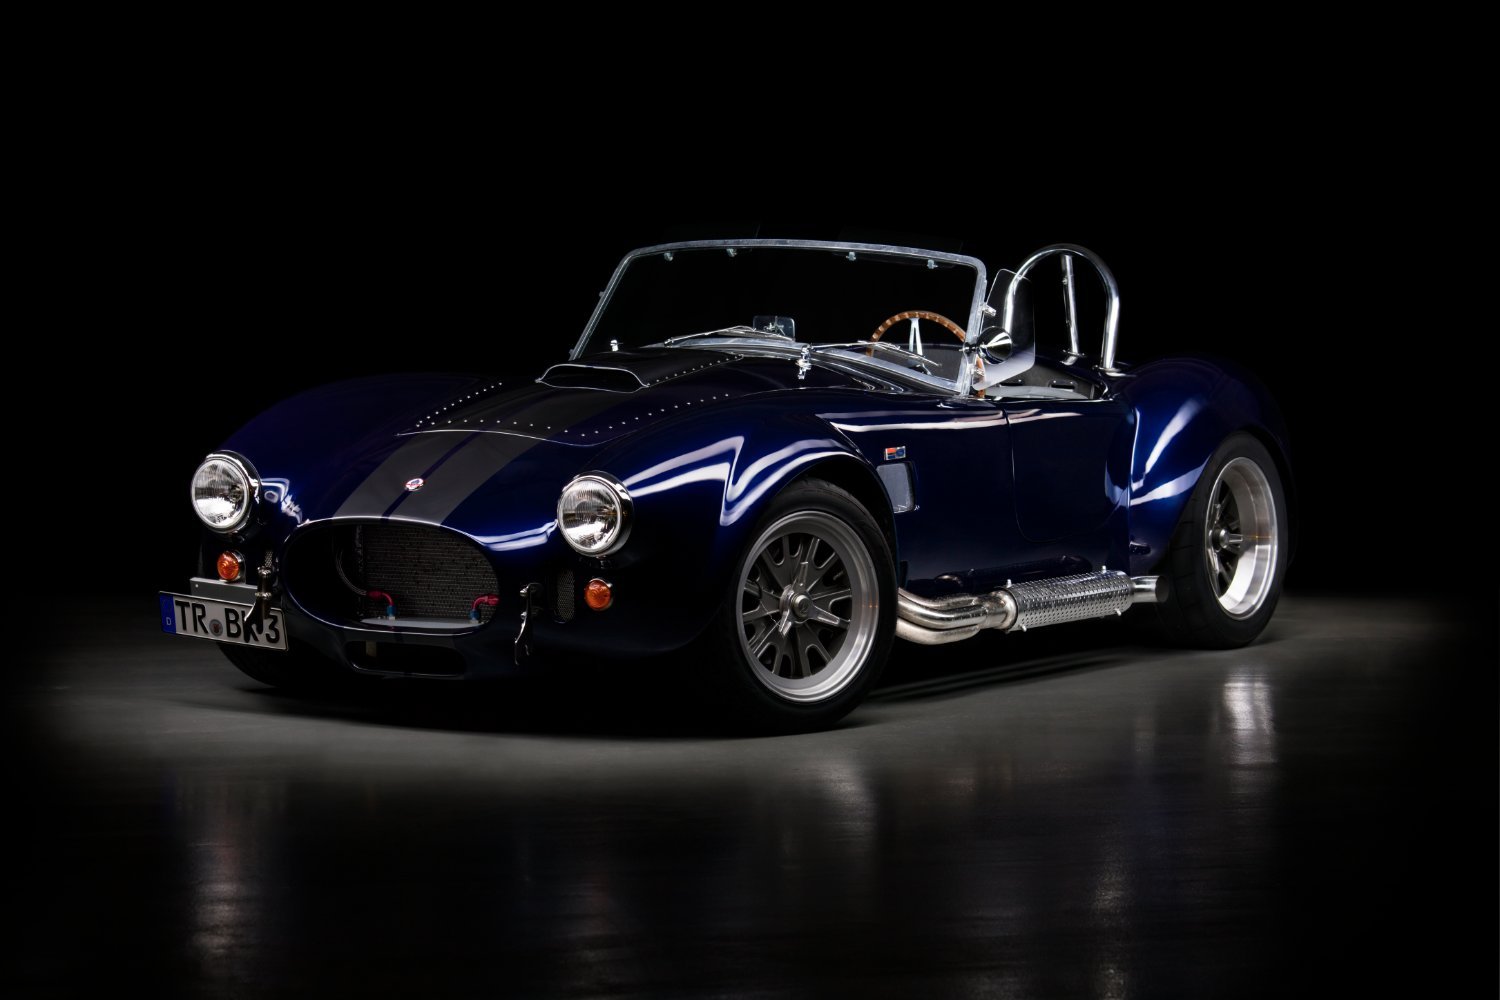 Ashley | 1965 Shelby Cobra by Backdraft Racing | Auto Reflection by Baptiste Griselle